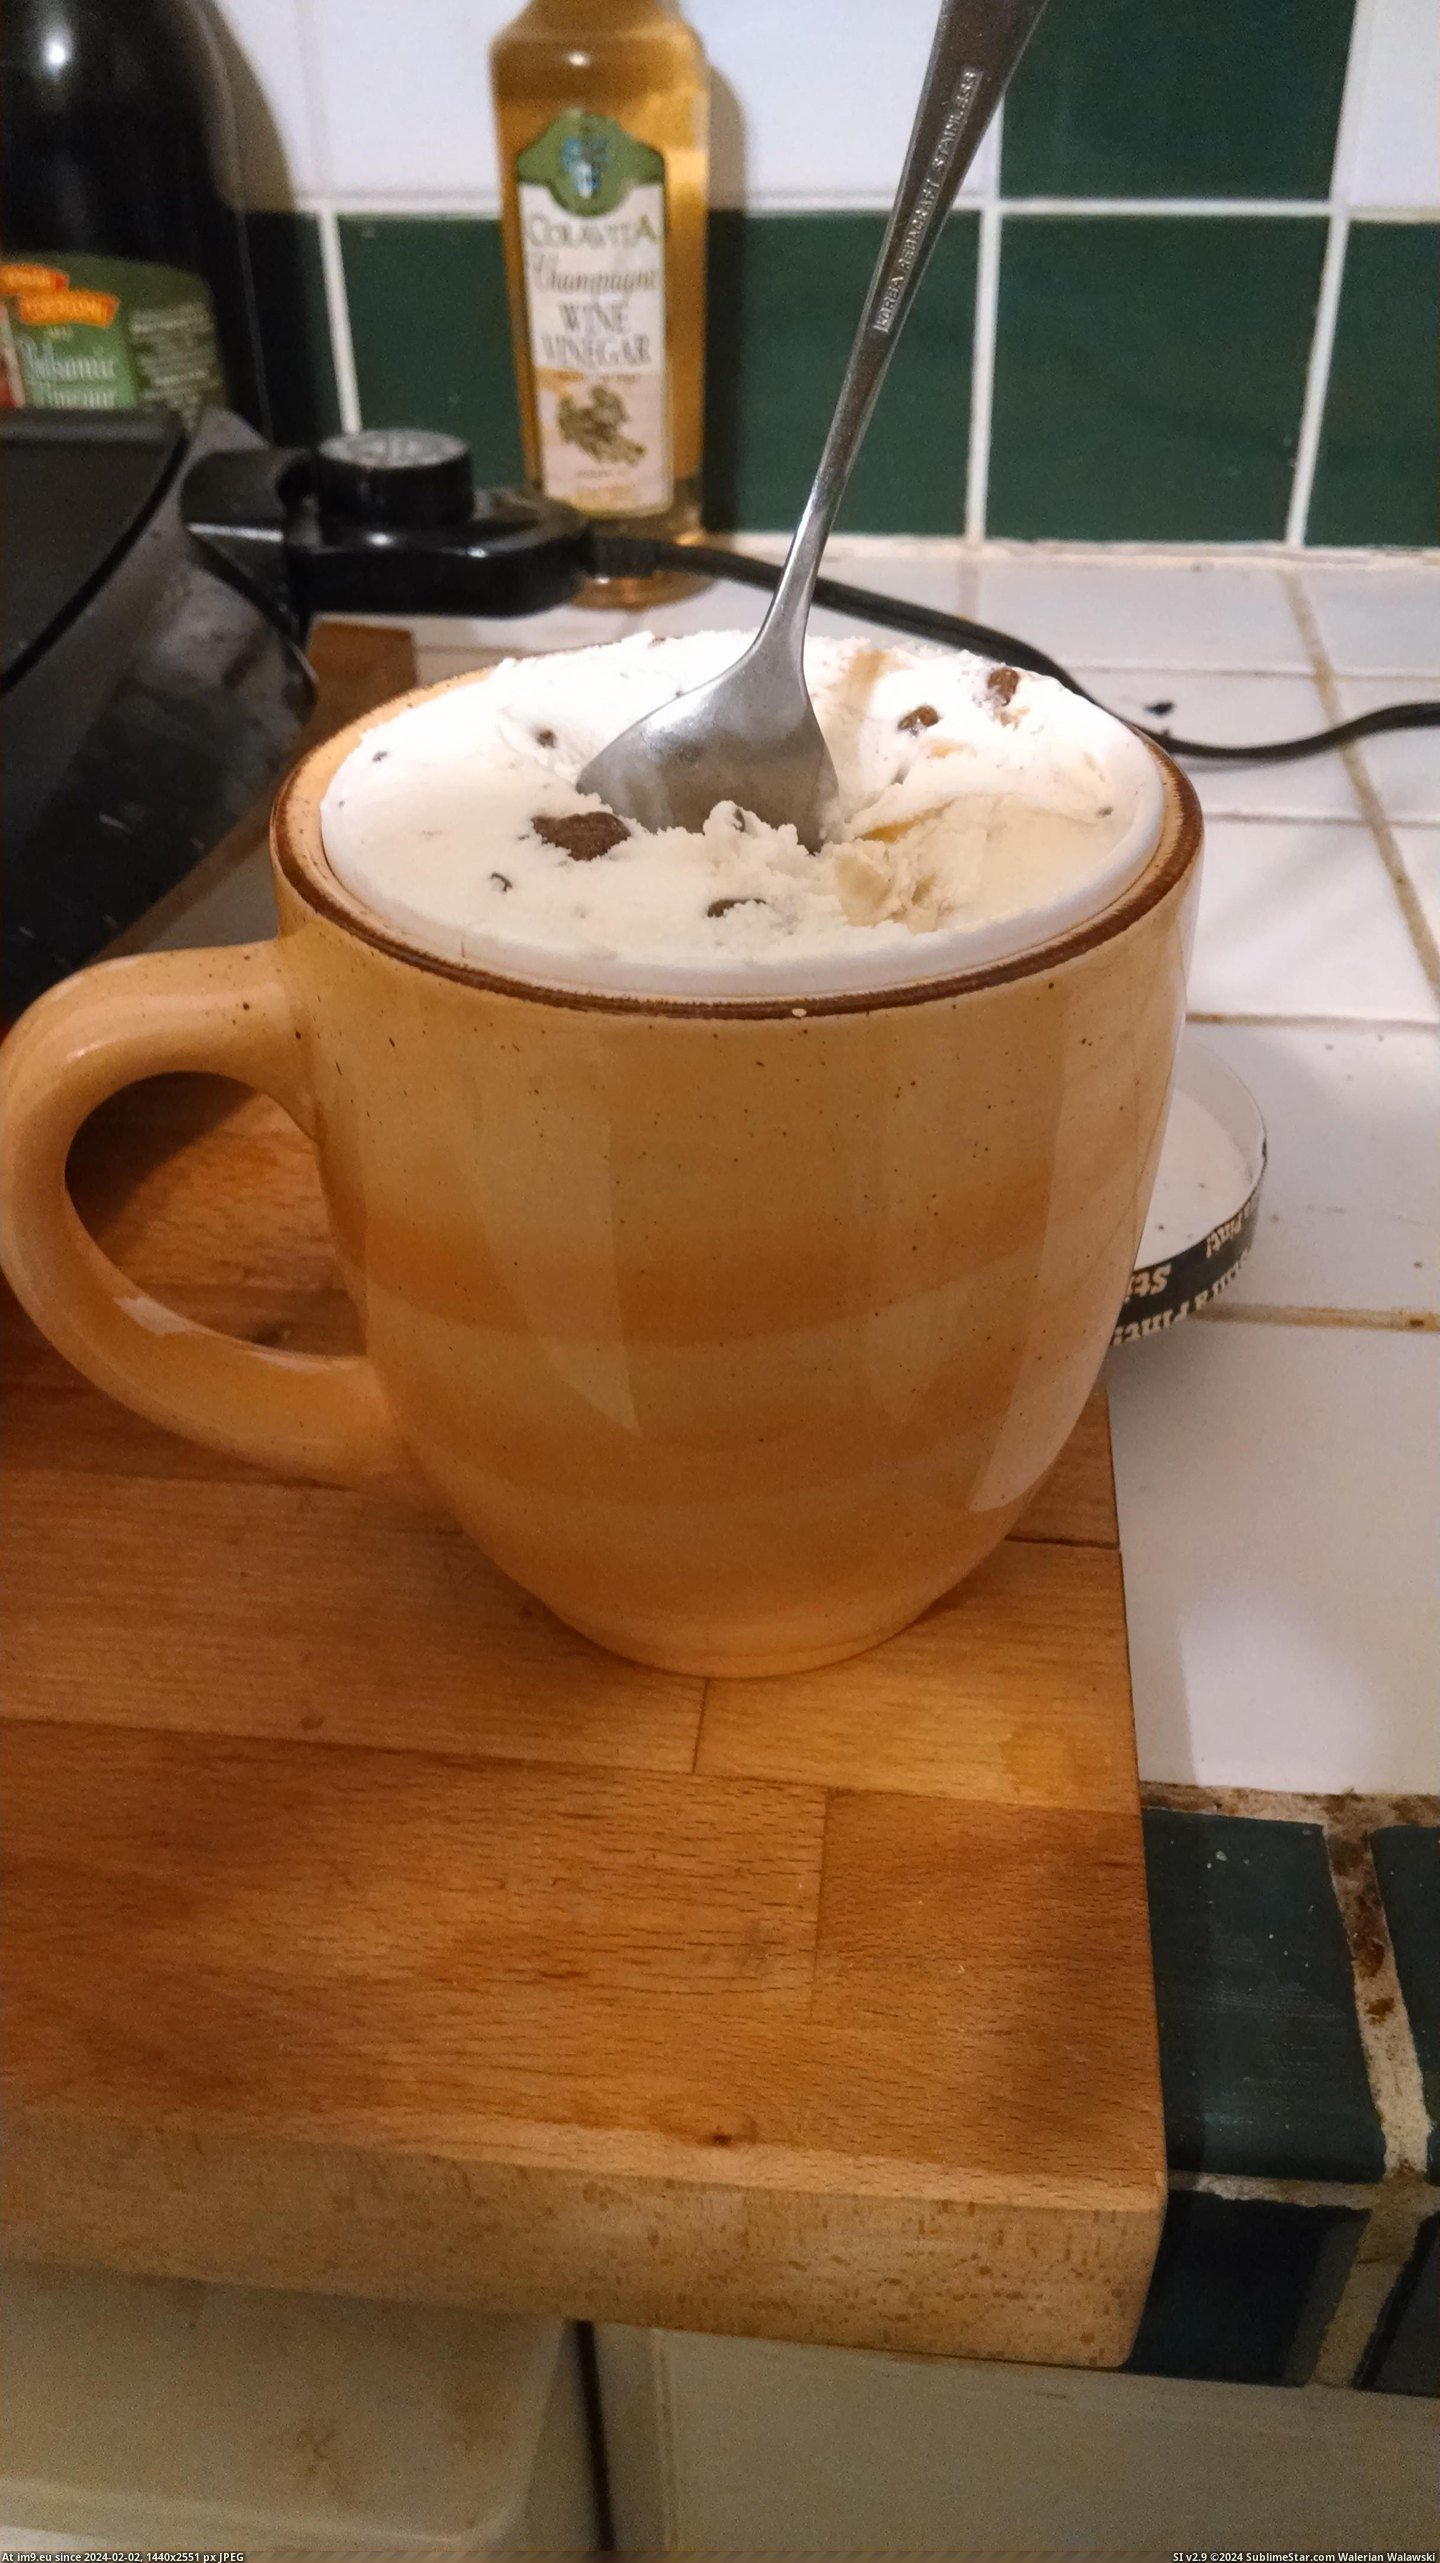 #Ice #Boyfriend #Mug #Promise #Cream #Cup [Pics] The mug I use when I promise my boyfriend I'll only have a cup of ice cream. 2 Pic. (Image of album My r/PICS favs))